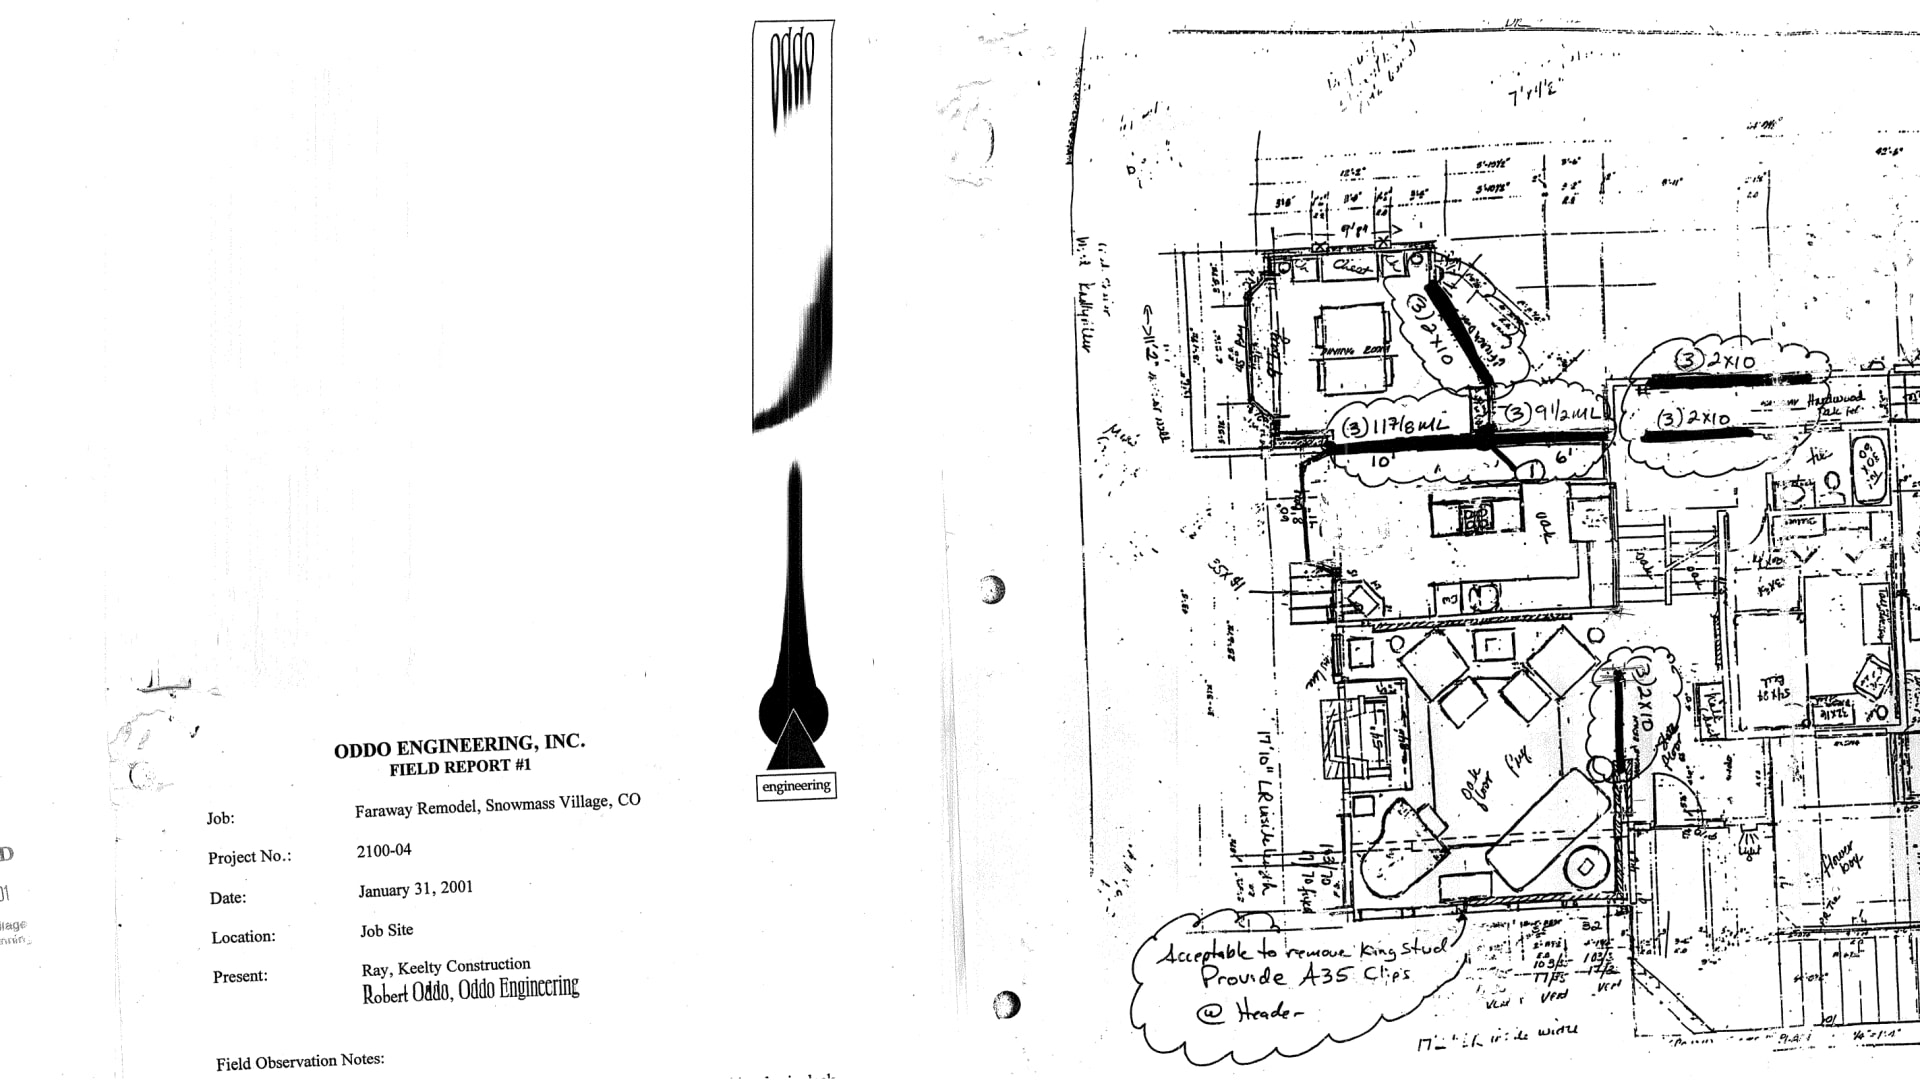 Floor Plans 1982 and 2001